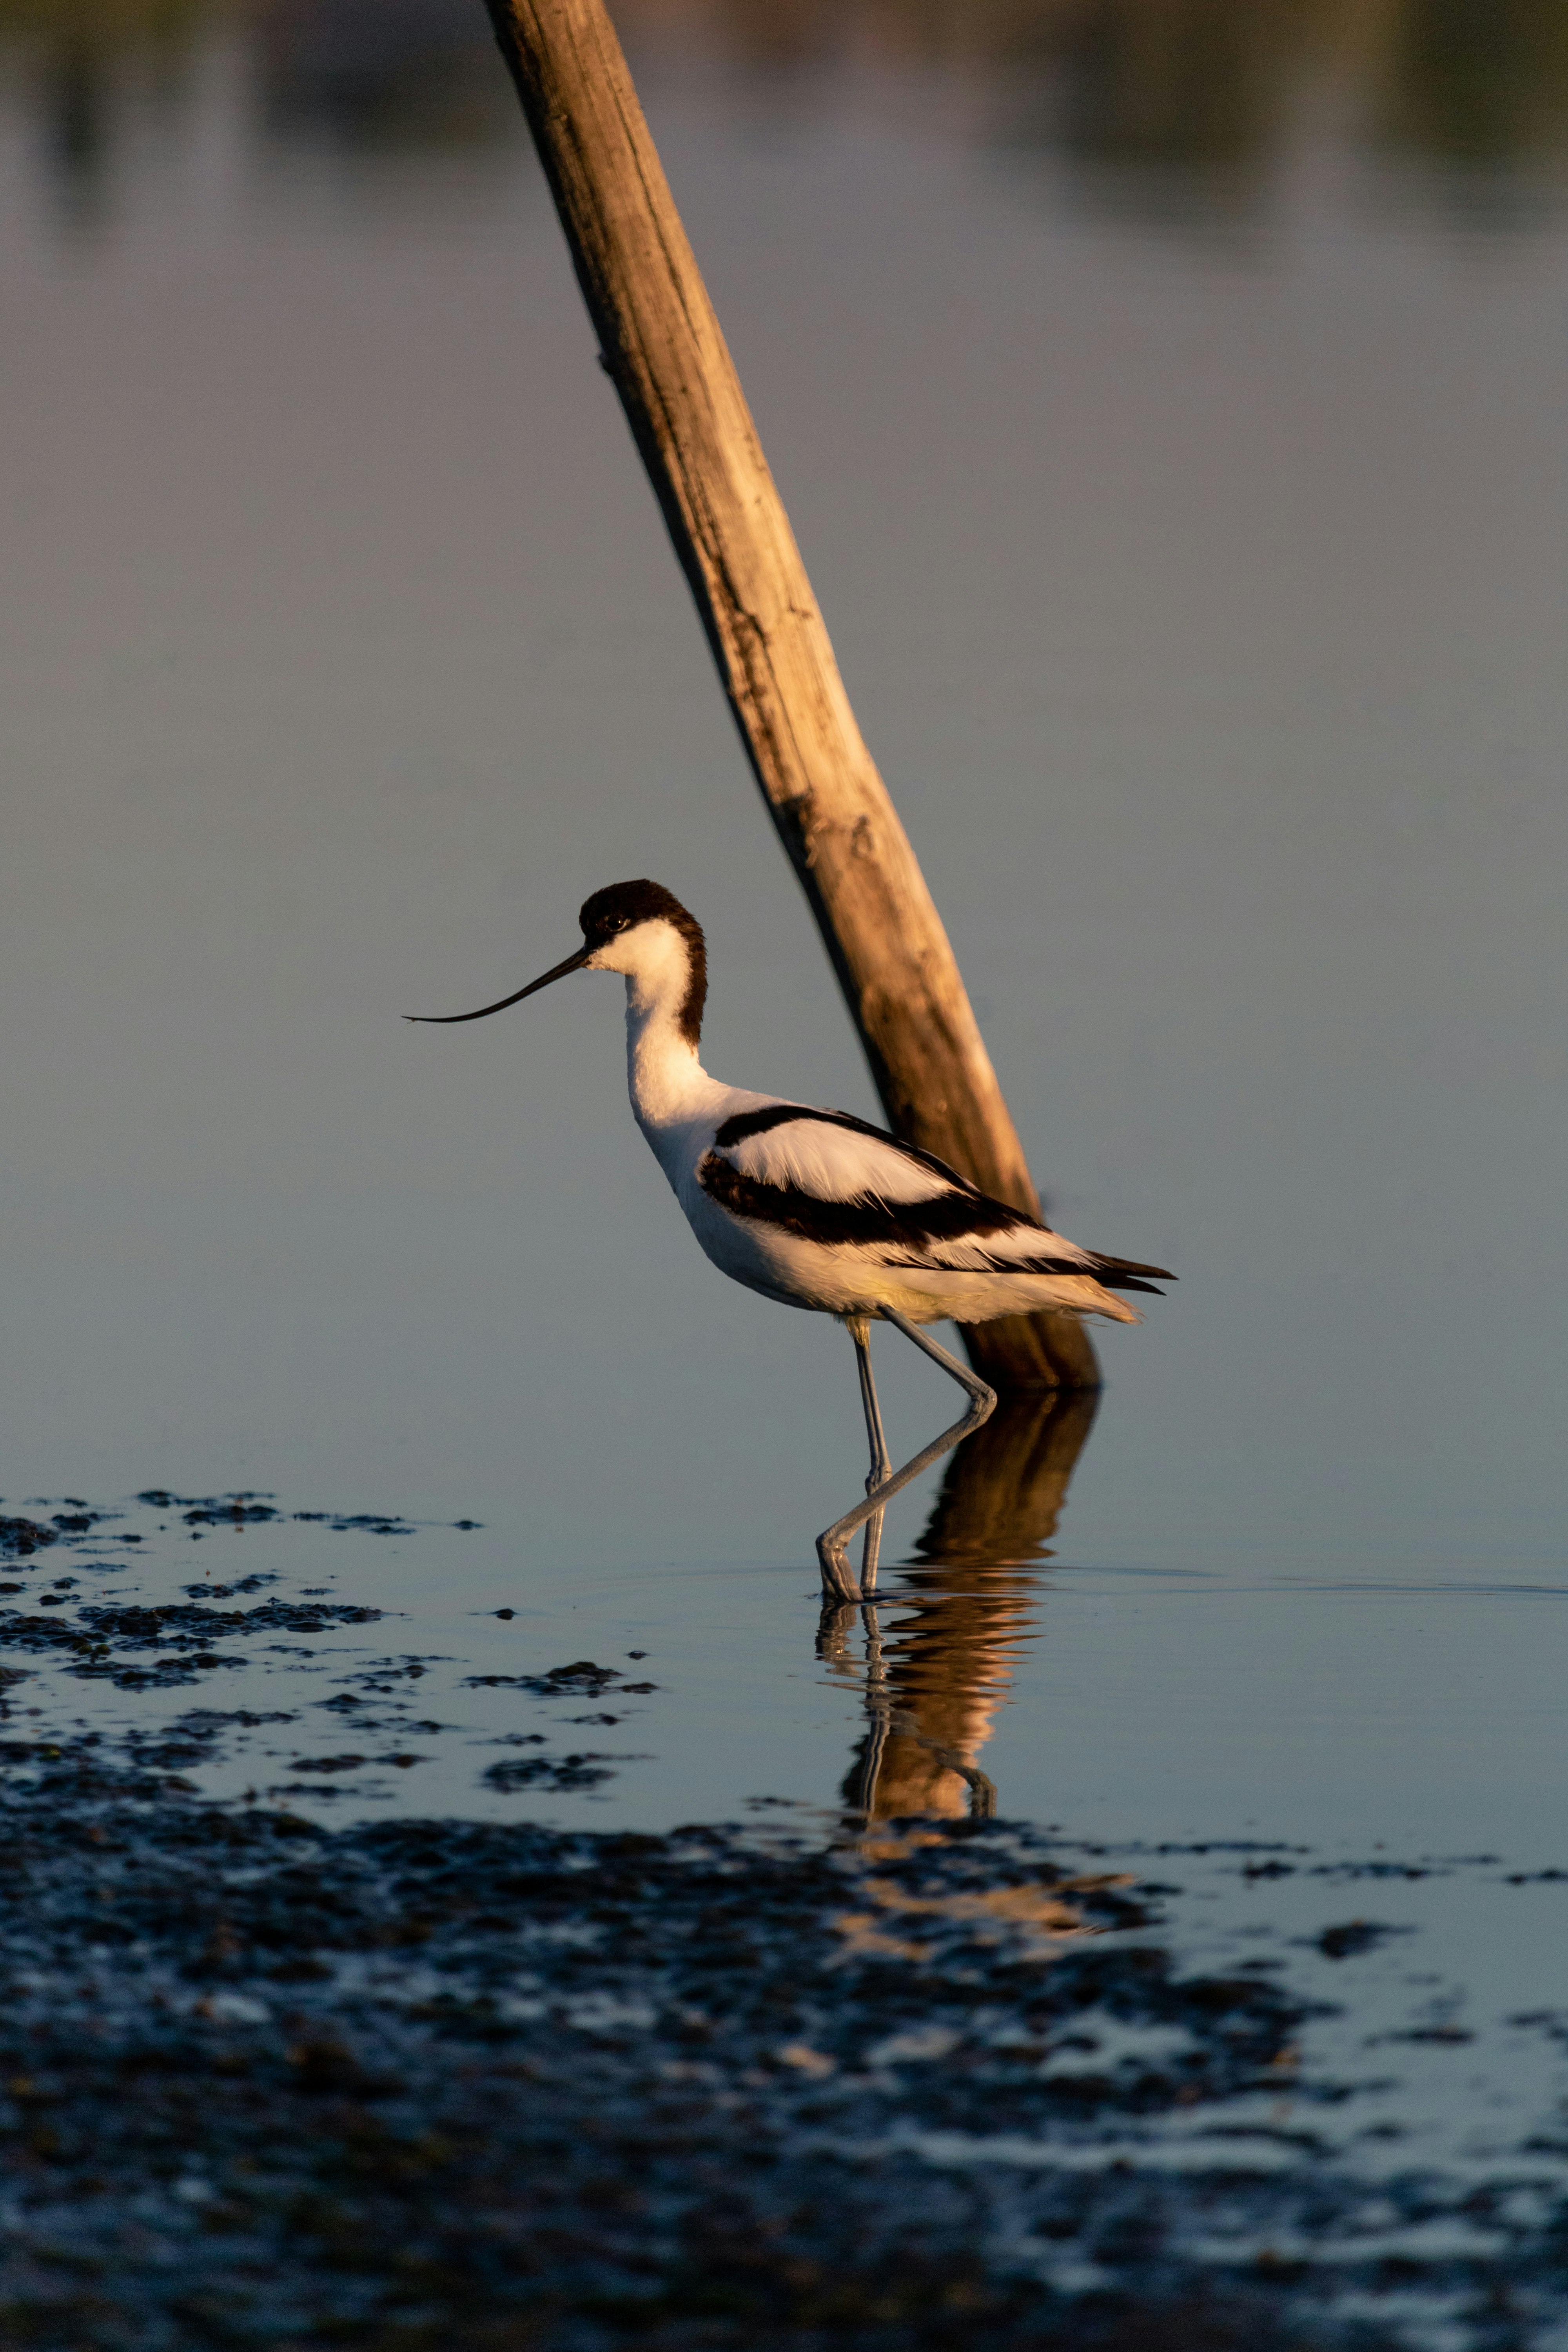 white and black bird on brown wooden stick on water during daytime